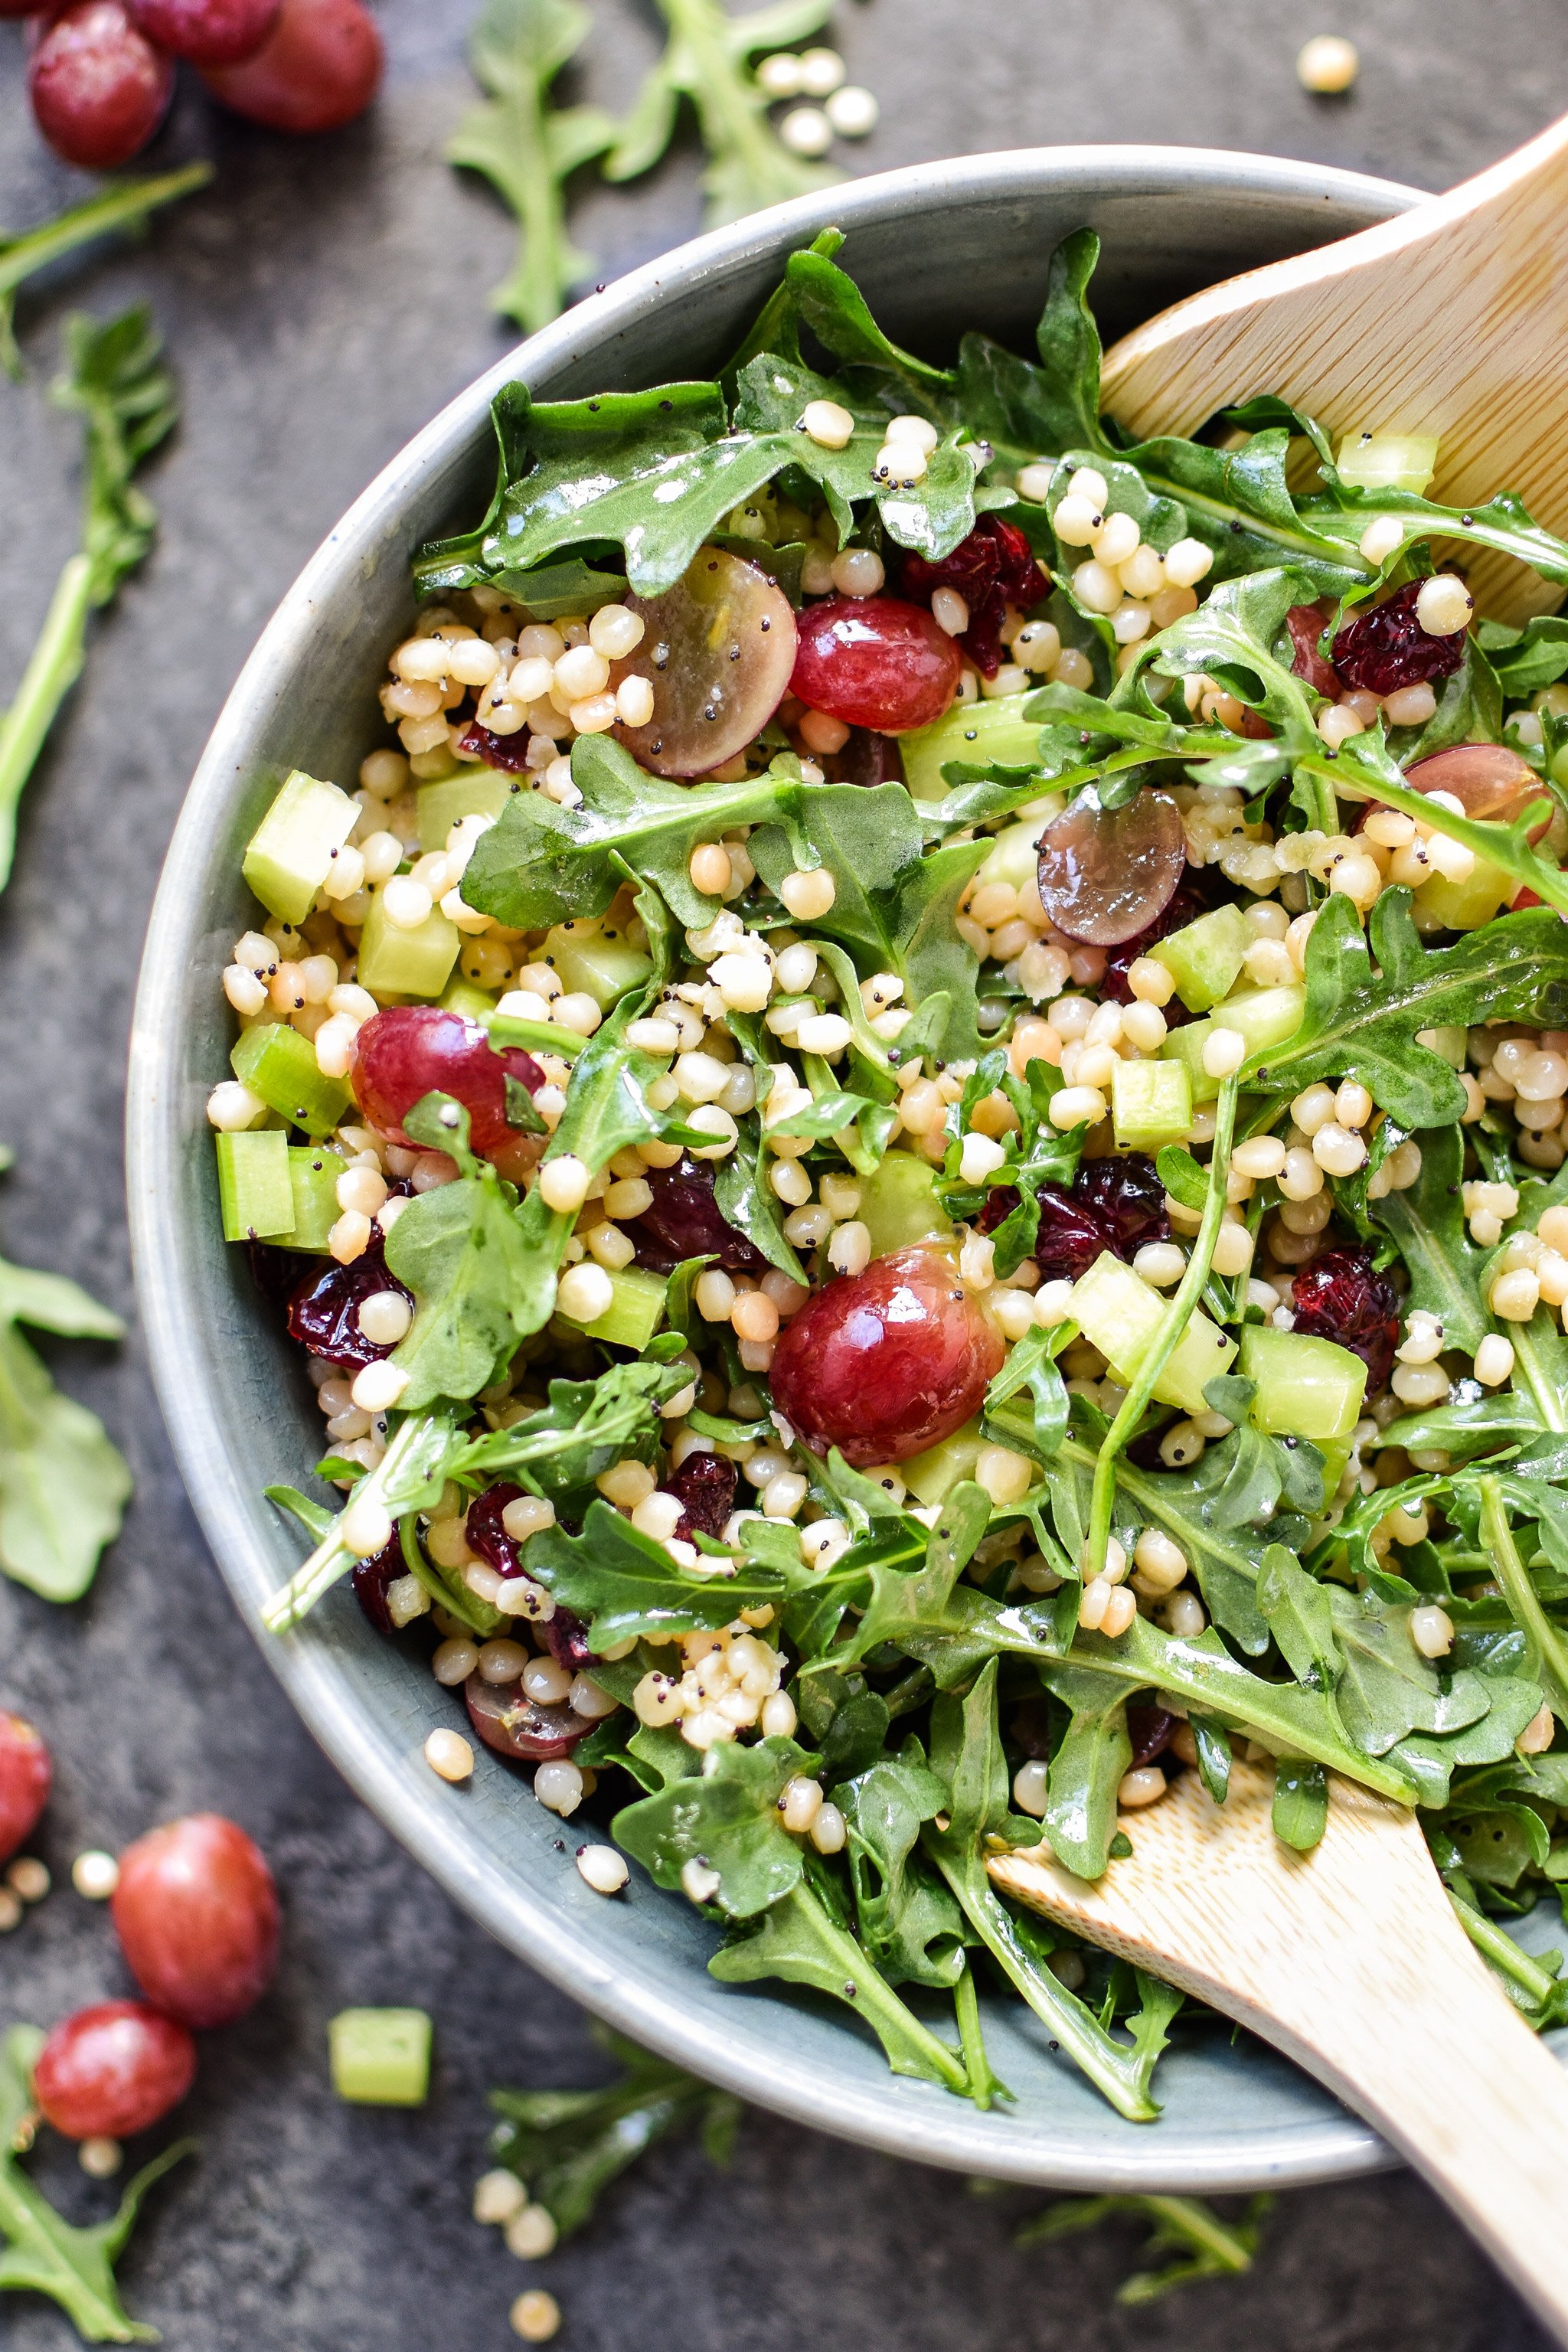 Make-Ahead Lemon Poppyseed Couscous Arugula Salad viewed from above in a serving bowl with utensils.